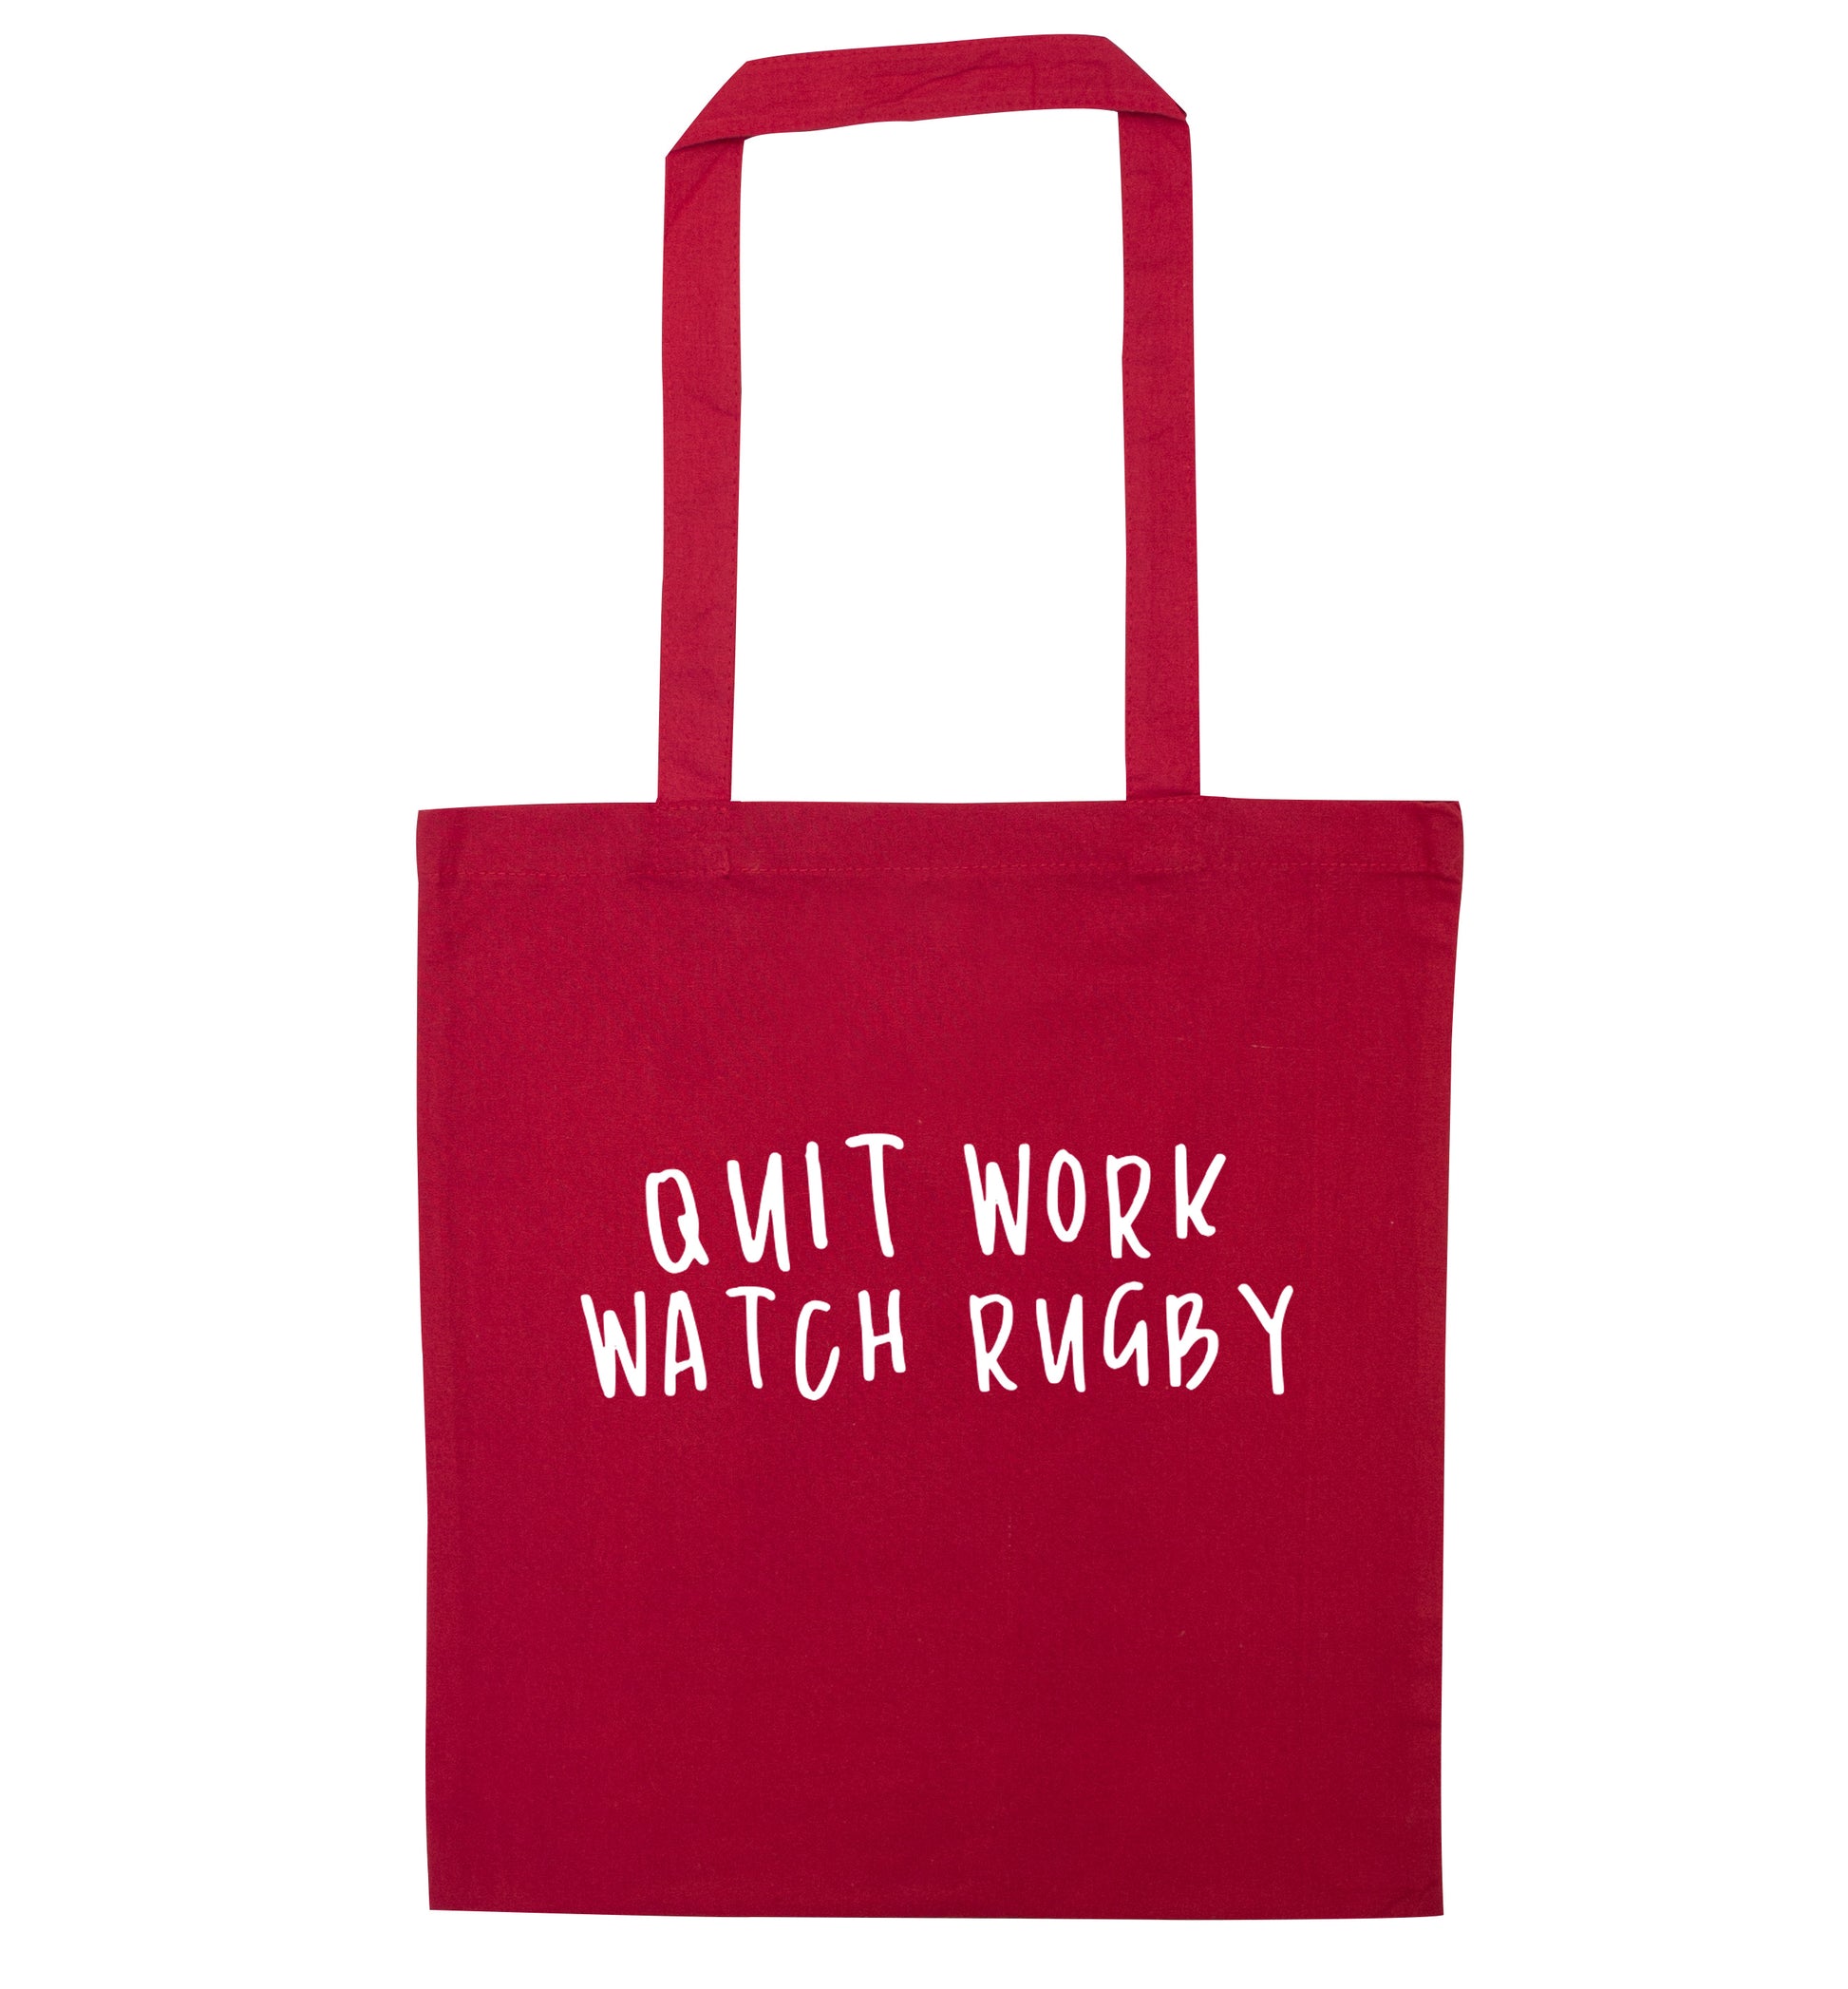 Quit work watch rugby red tote bag